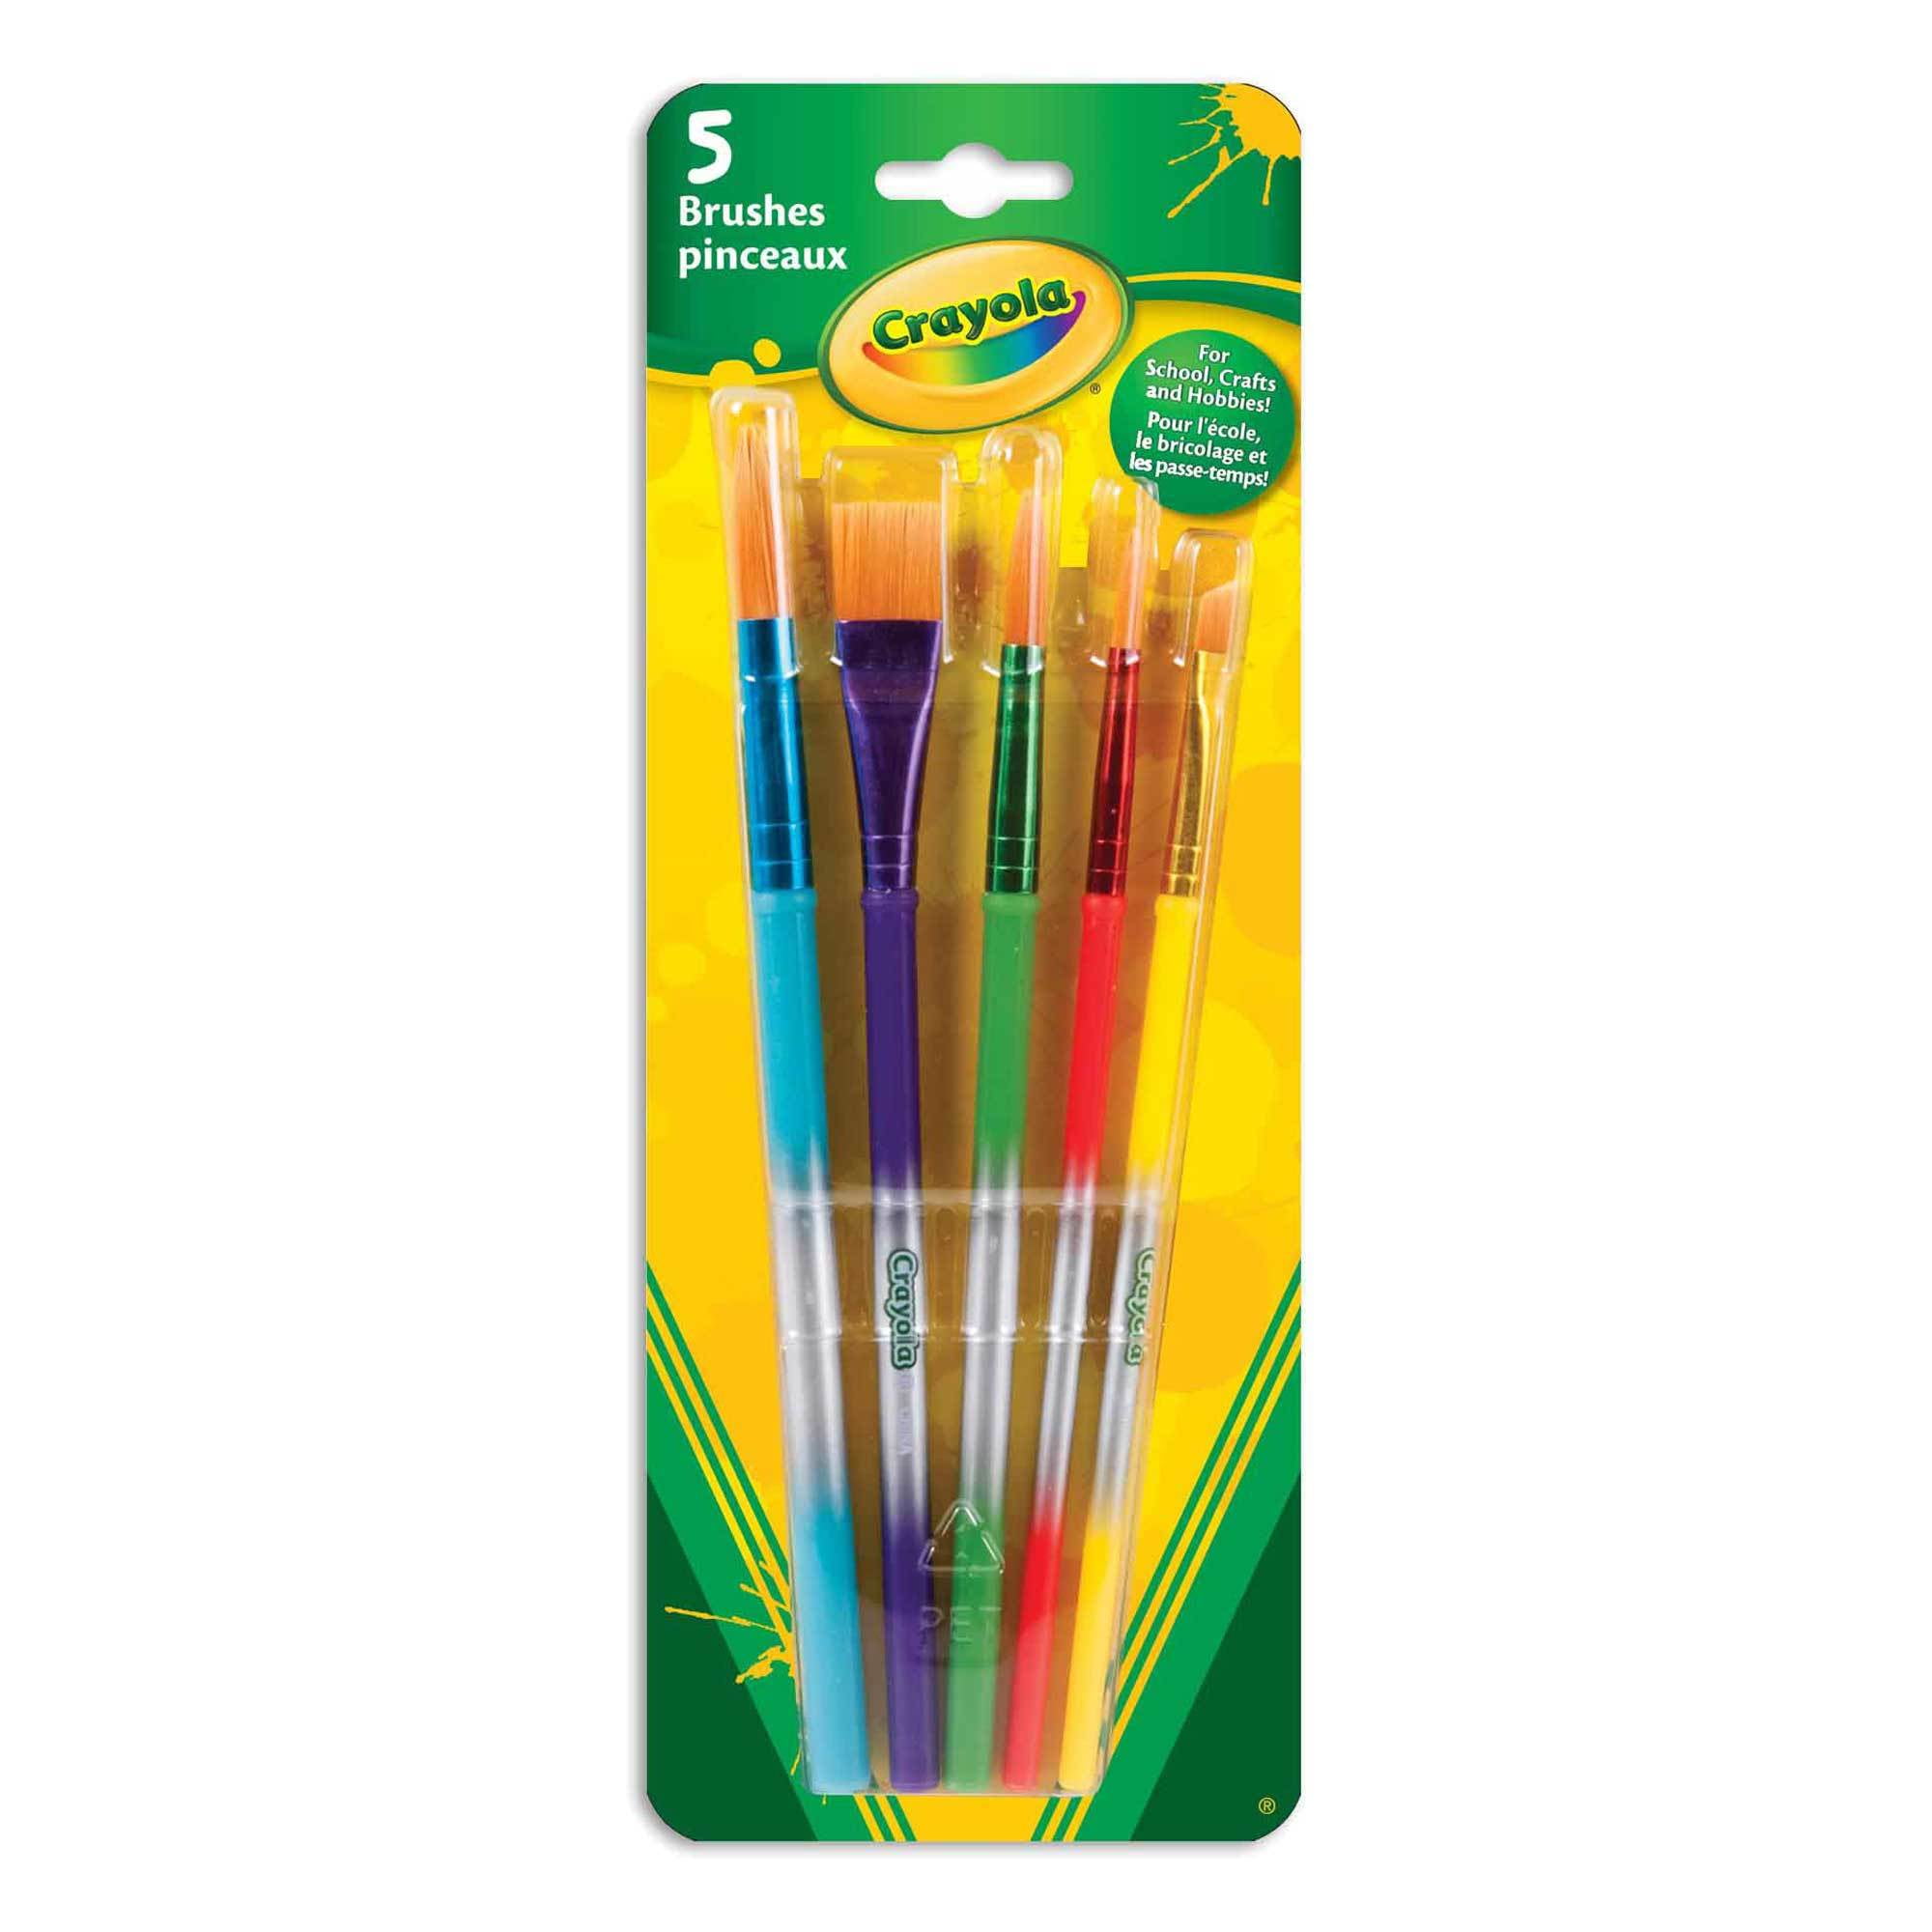 Crayola Washable Paint Brush Pens - 5 Count (2-Pack)